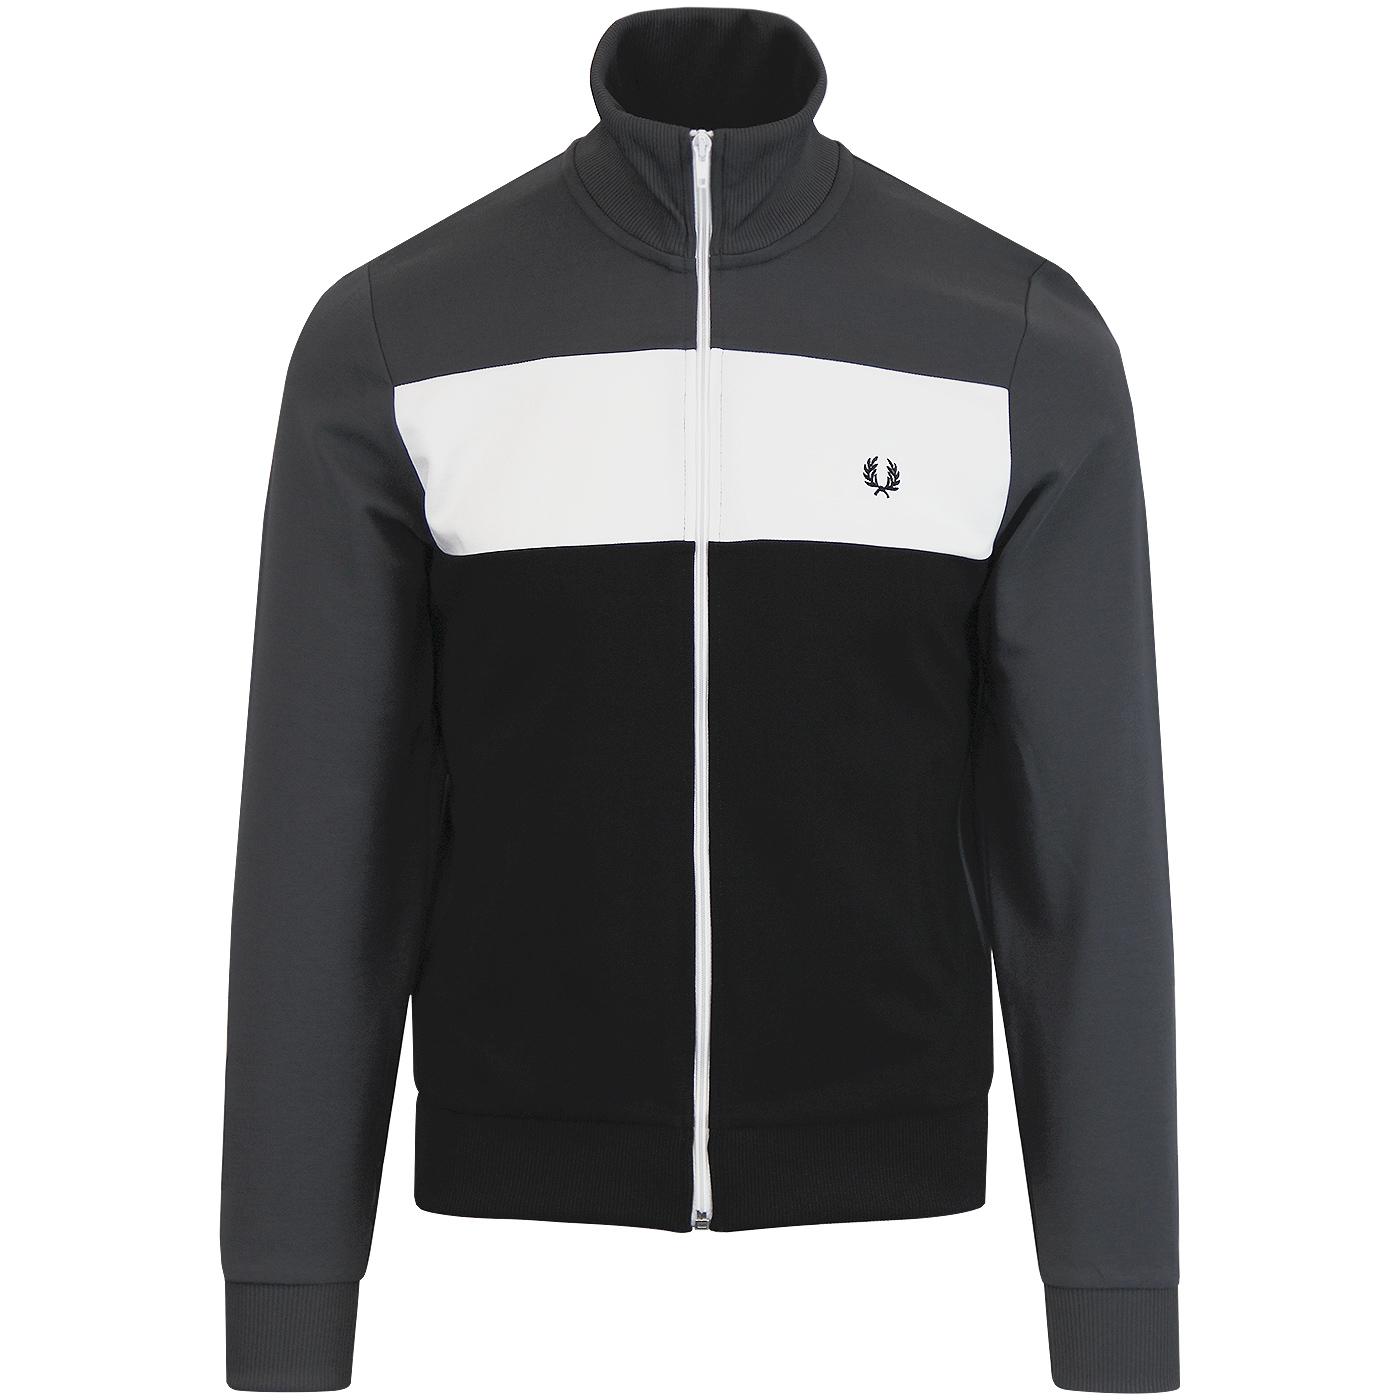 FRED PERRY Retro Colour Block Panel Track Jacket